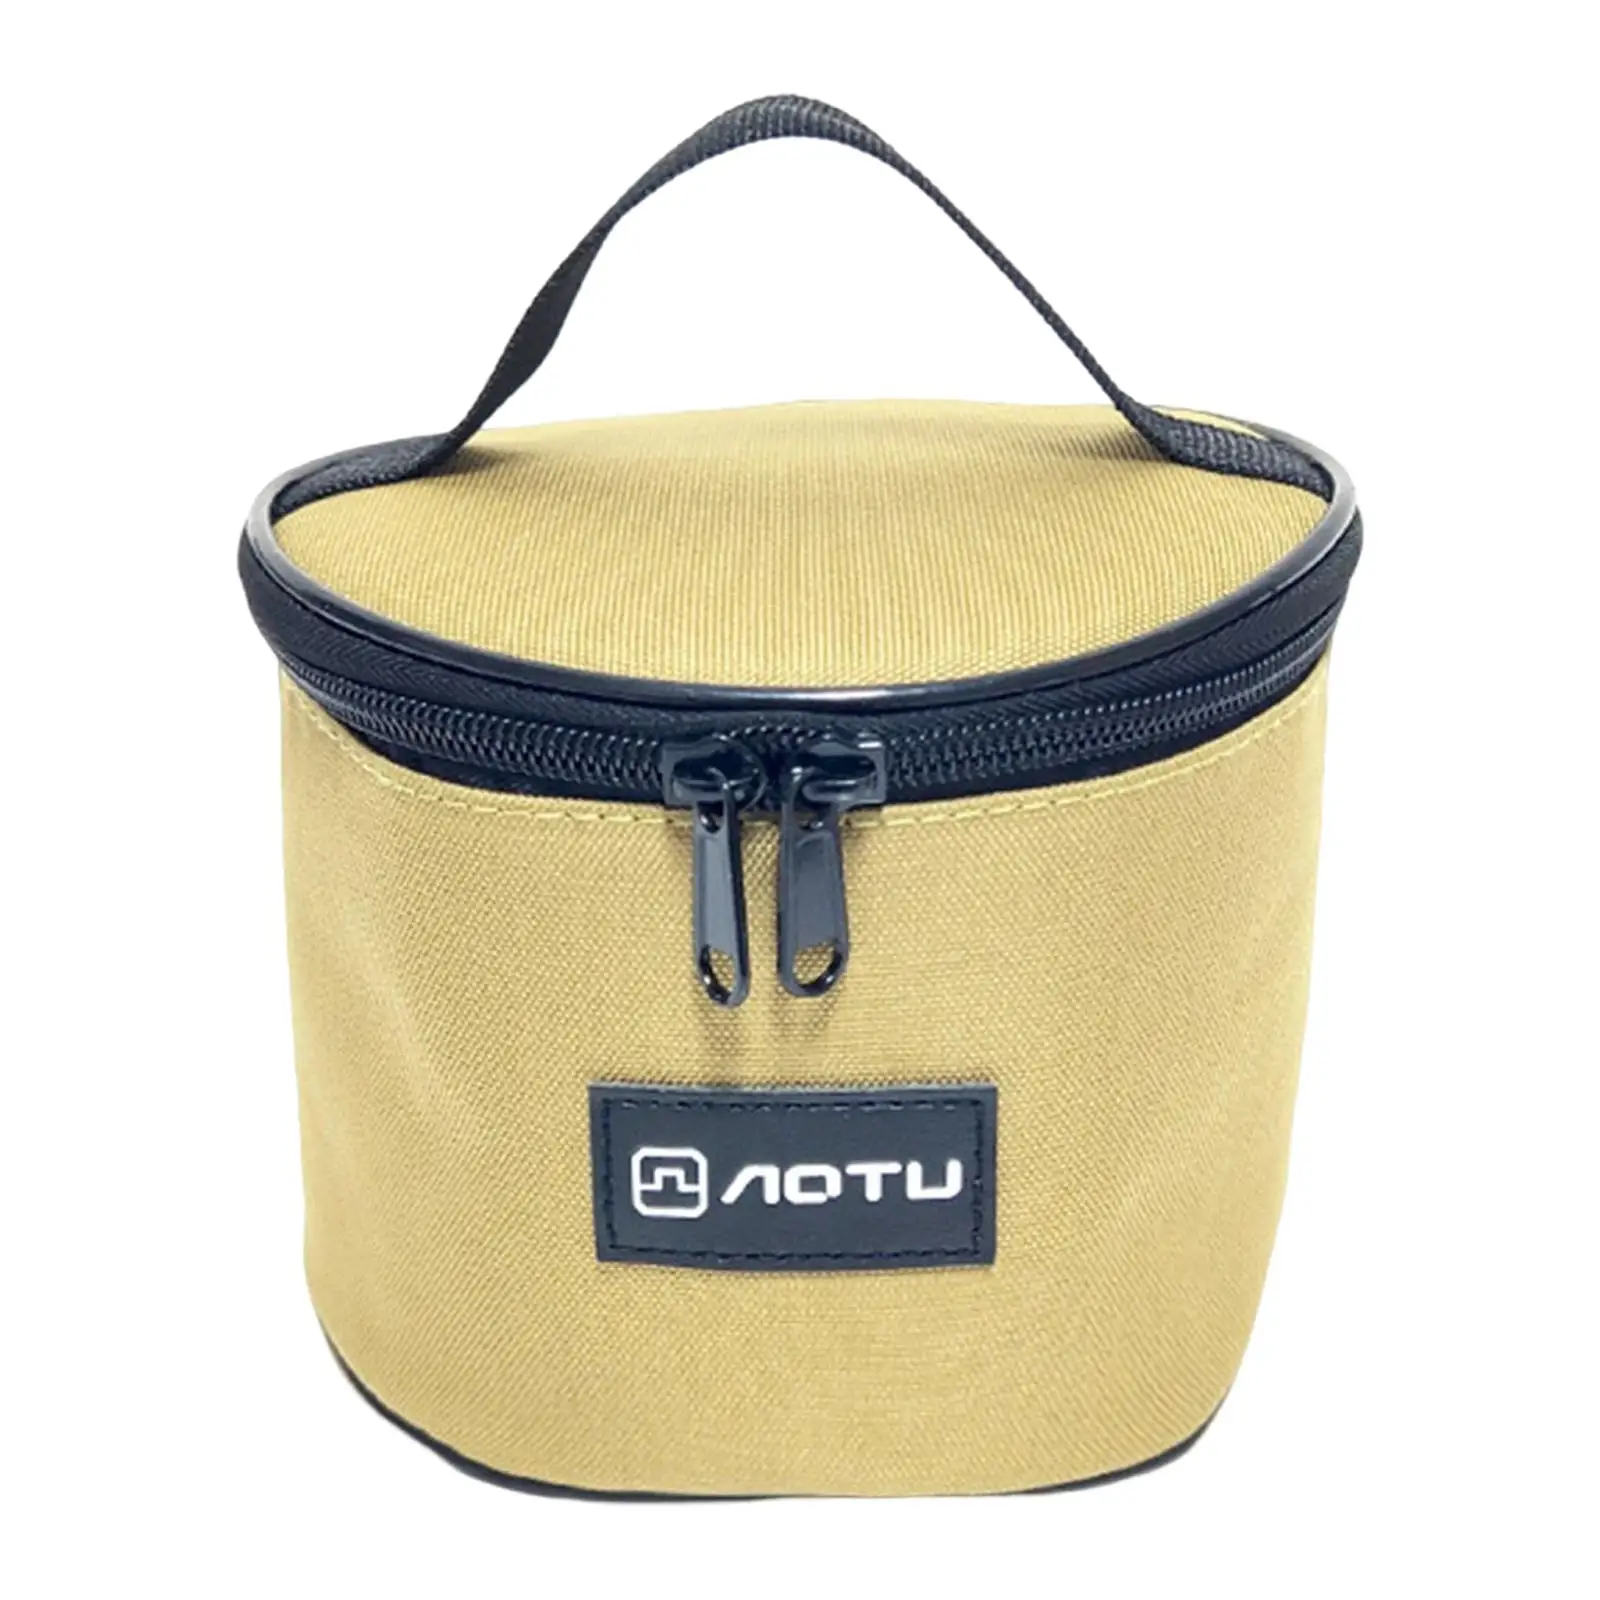 Portable Bowl Storage Bag Activities Waterproof Tableware Hanging Organizer Camping Pouch for Travel Picnic Dinnerware Fishing